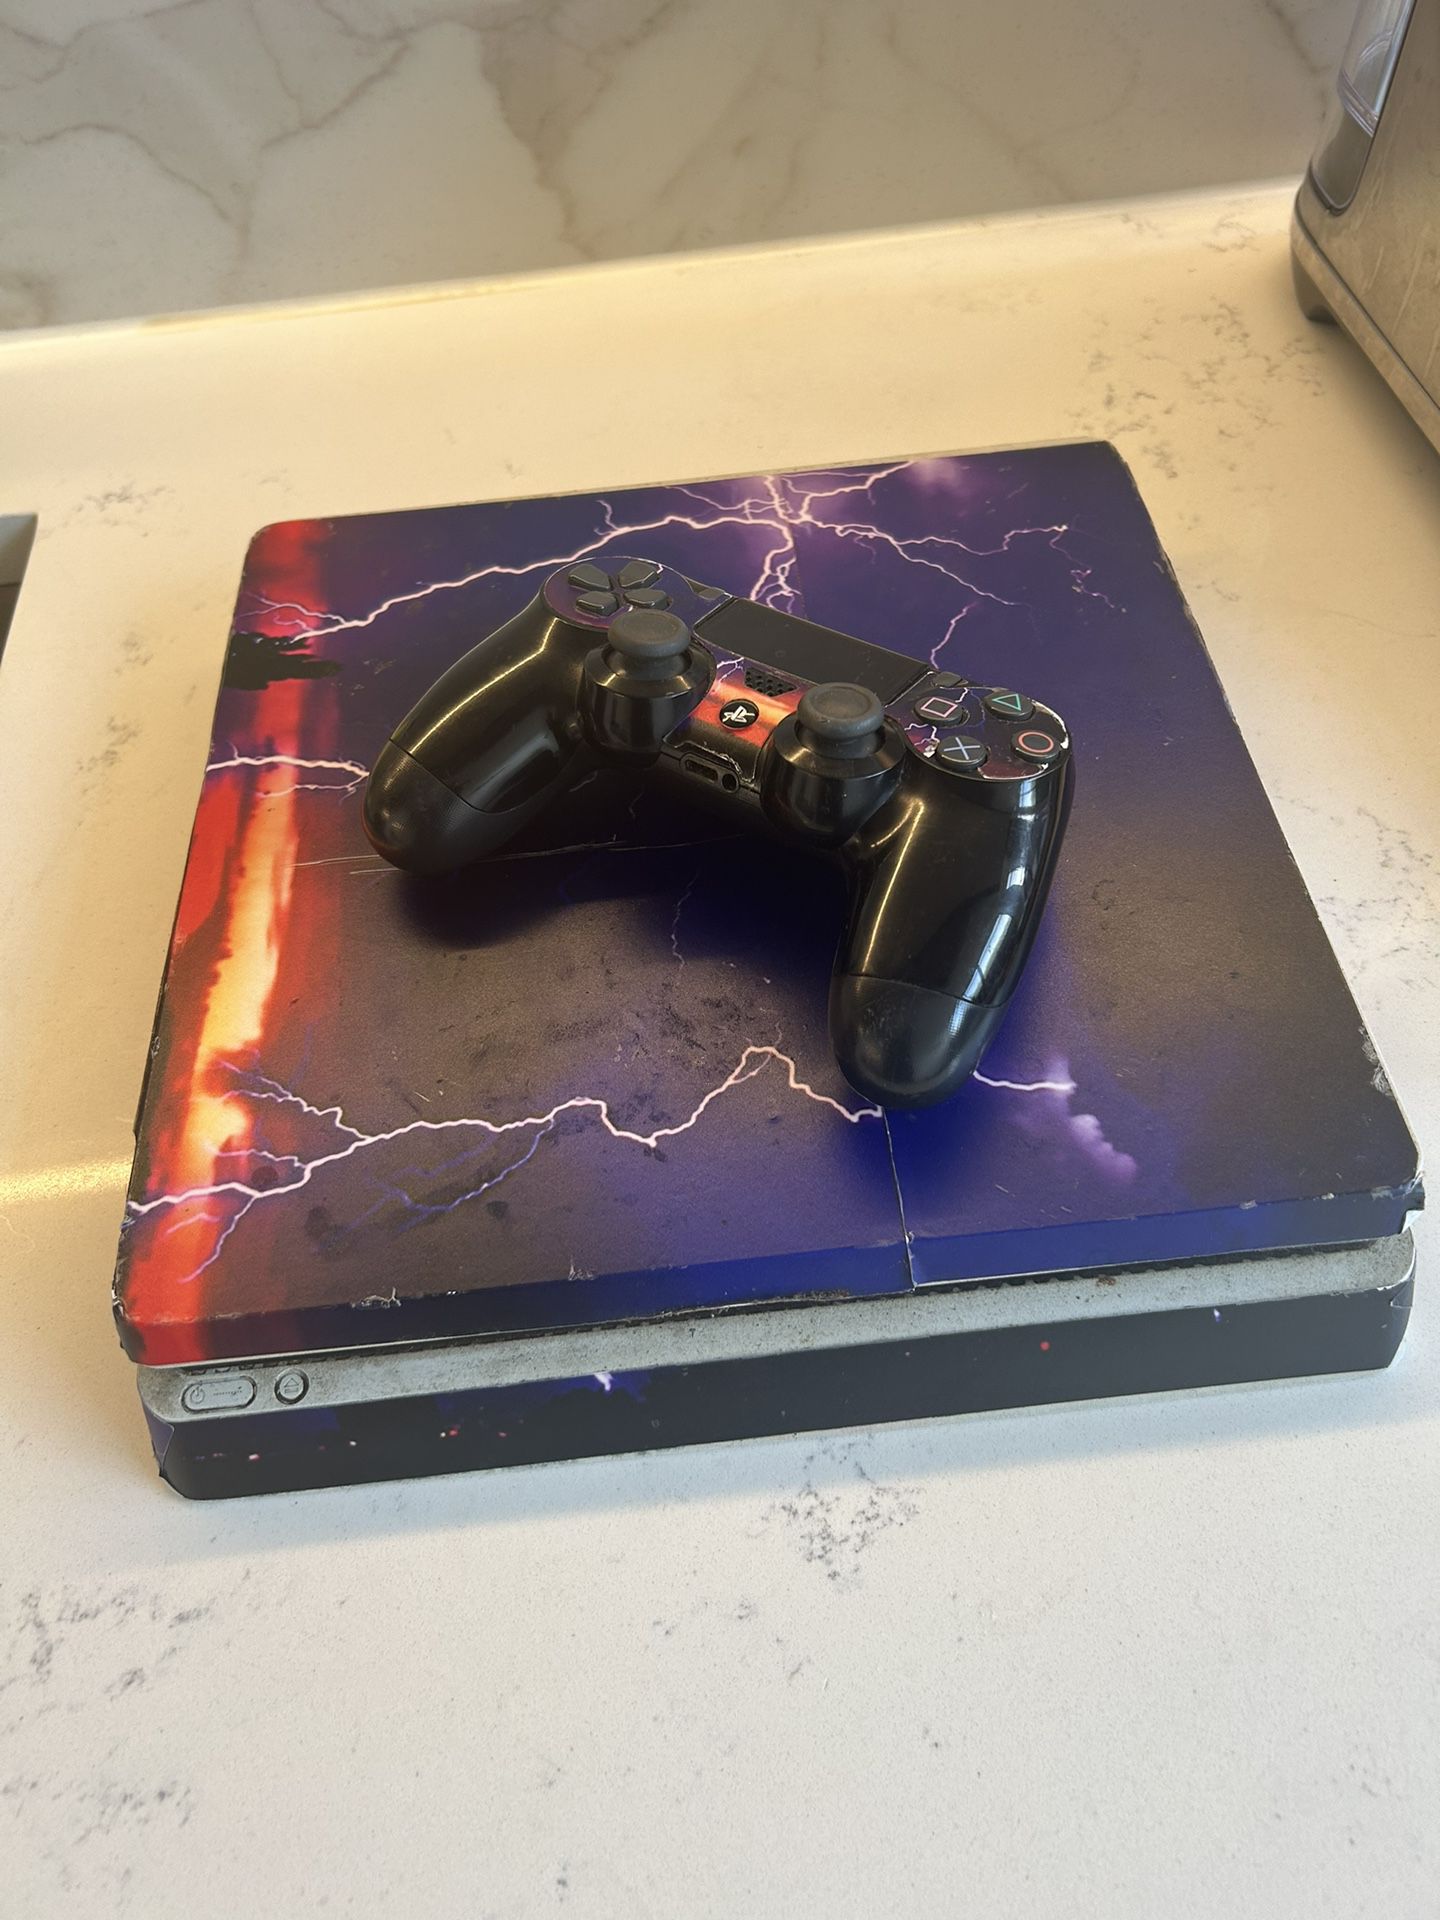 PS4 CONSOLE